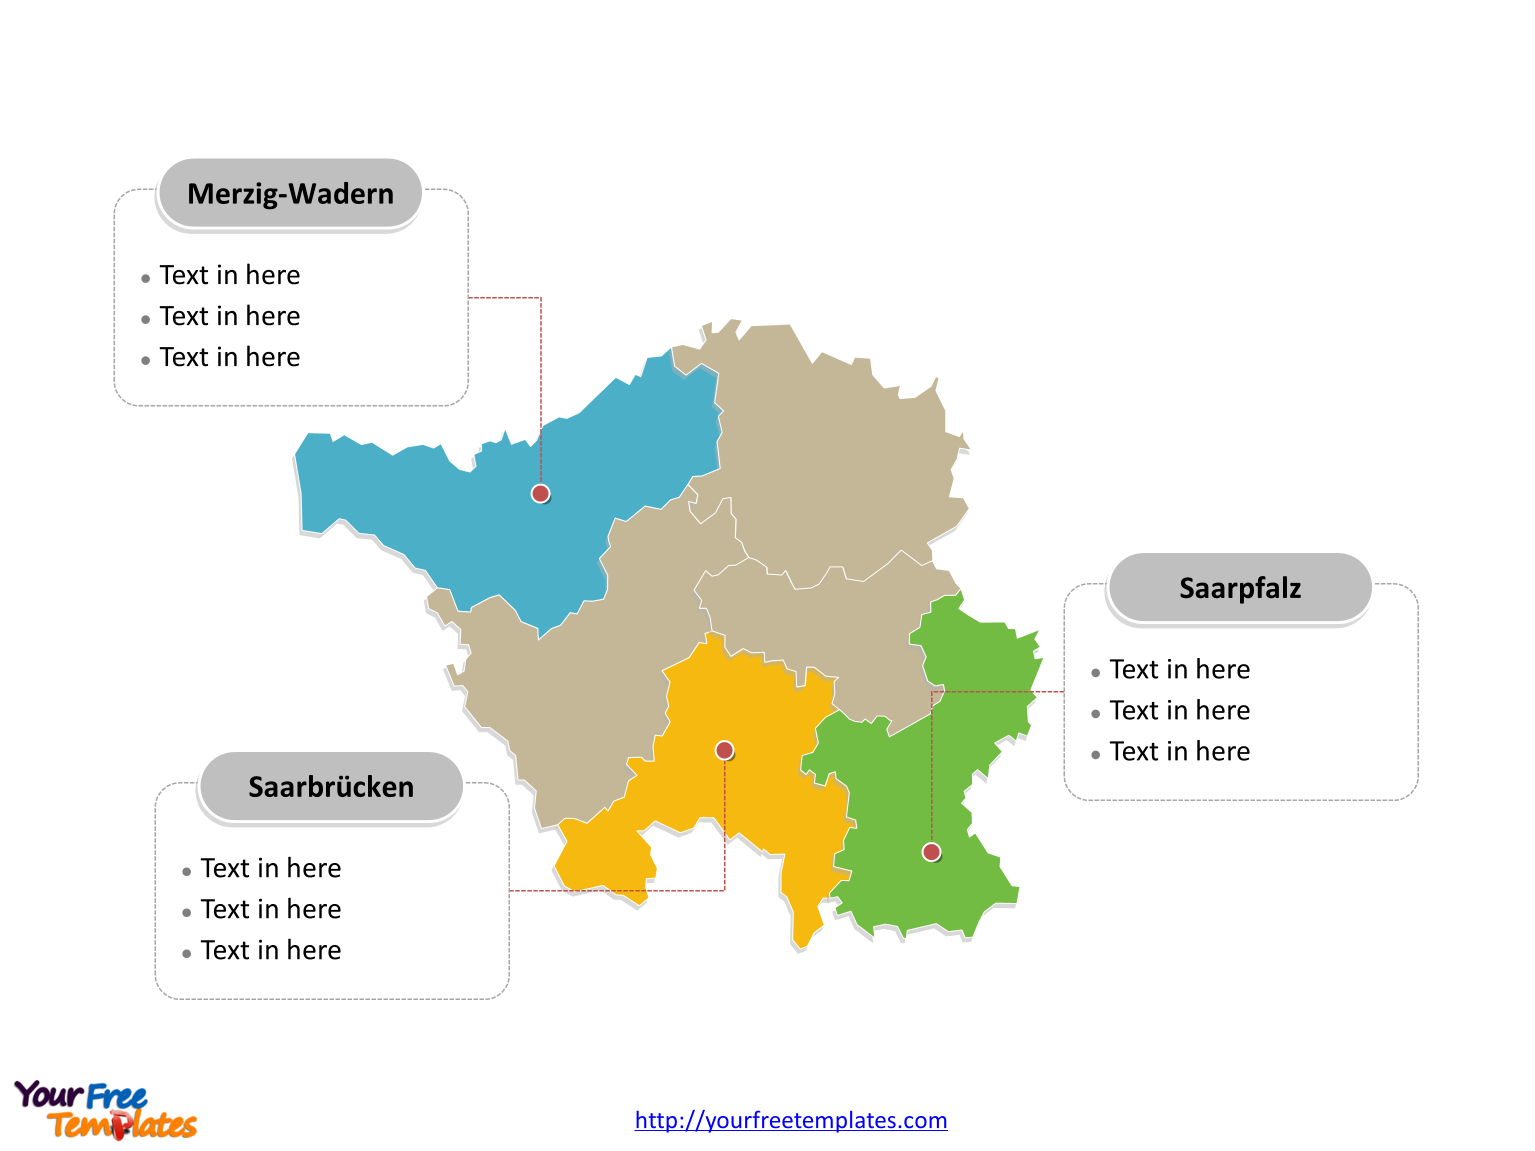 Powerpoint template of Saarland Map labeled with major political districts